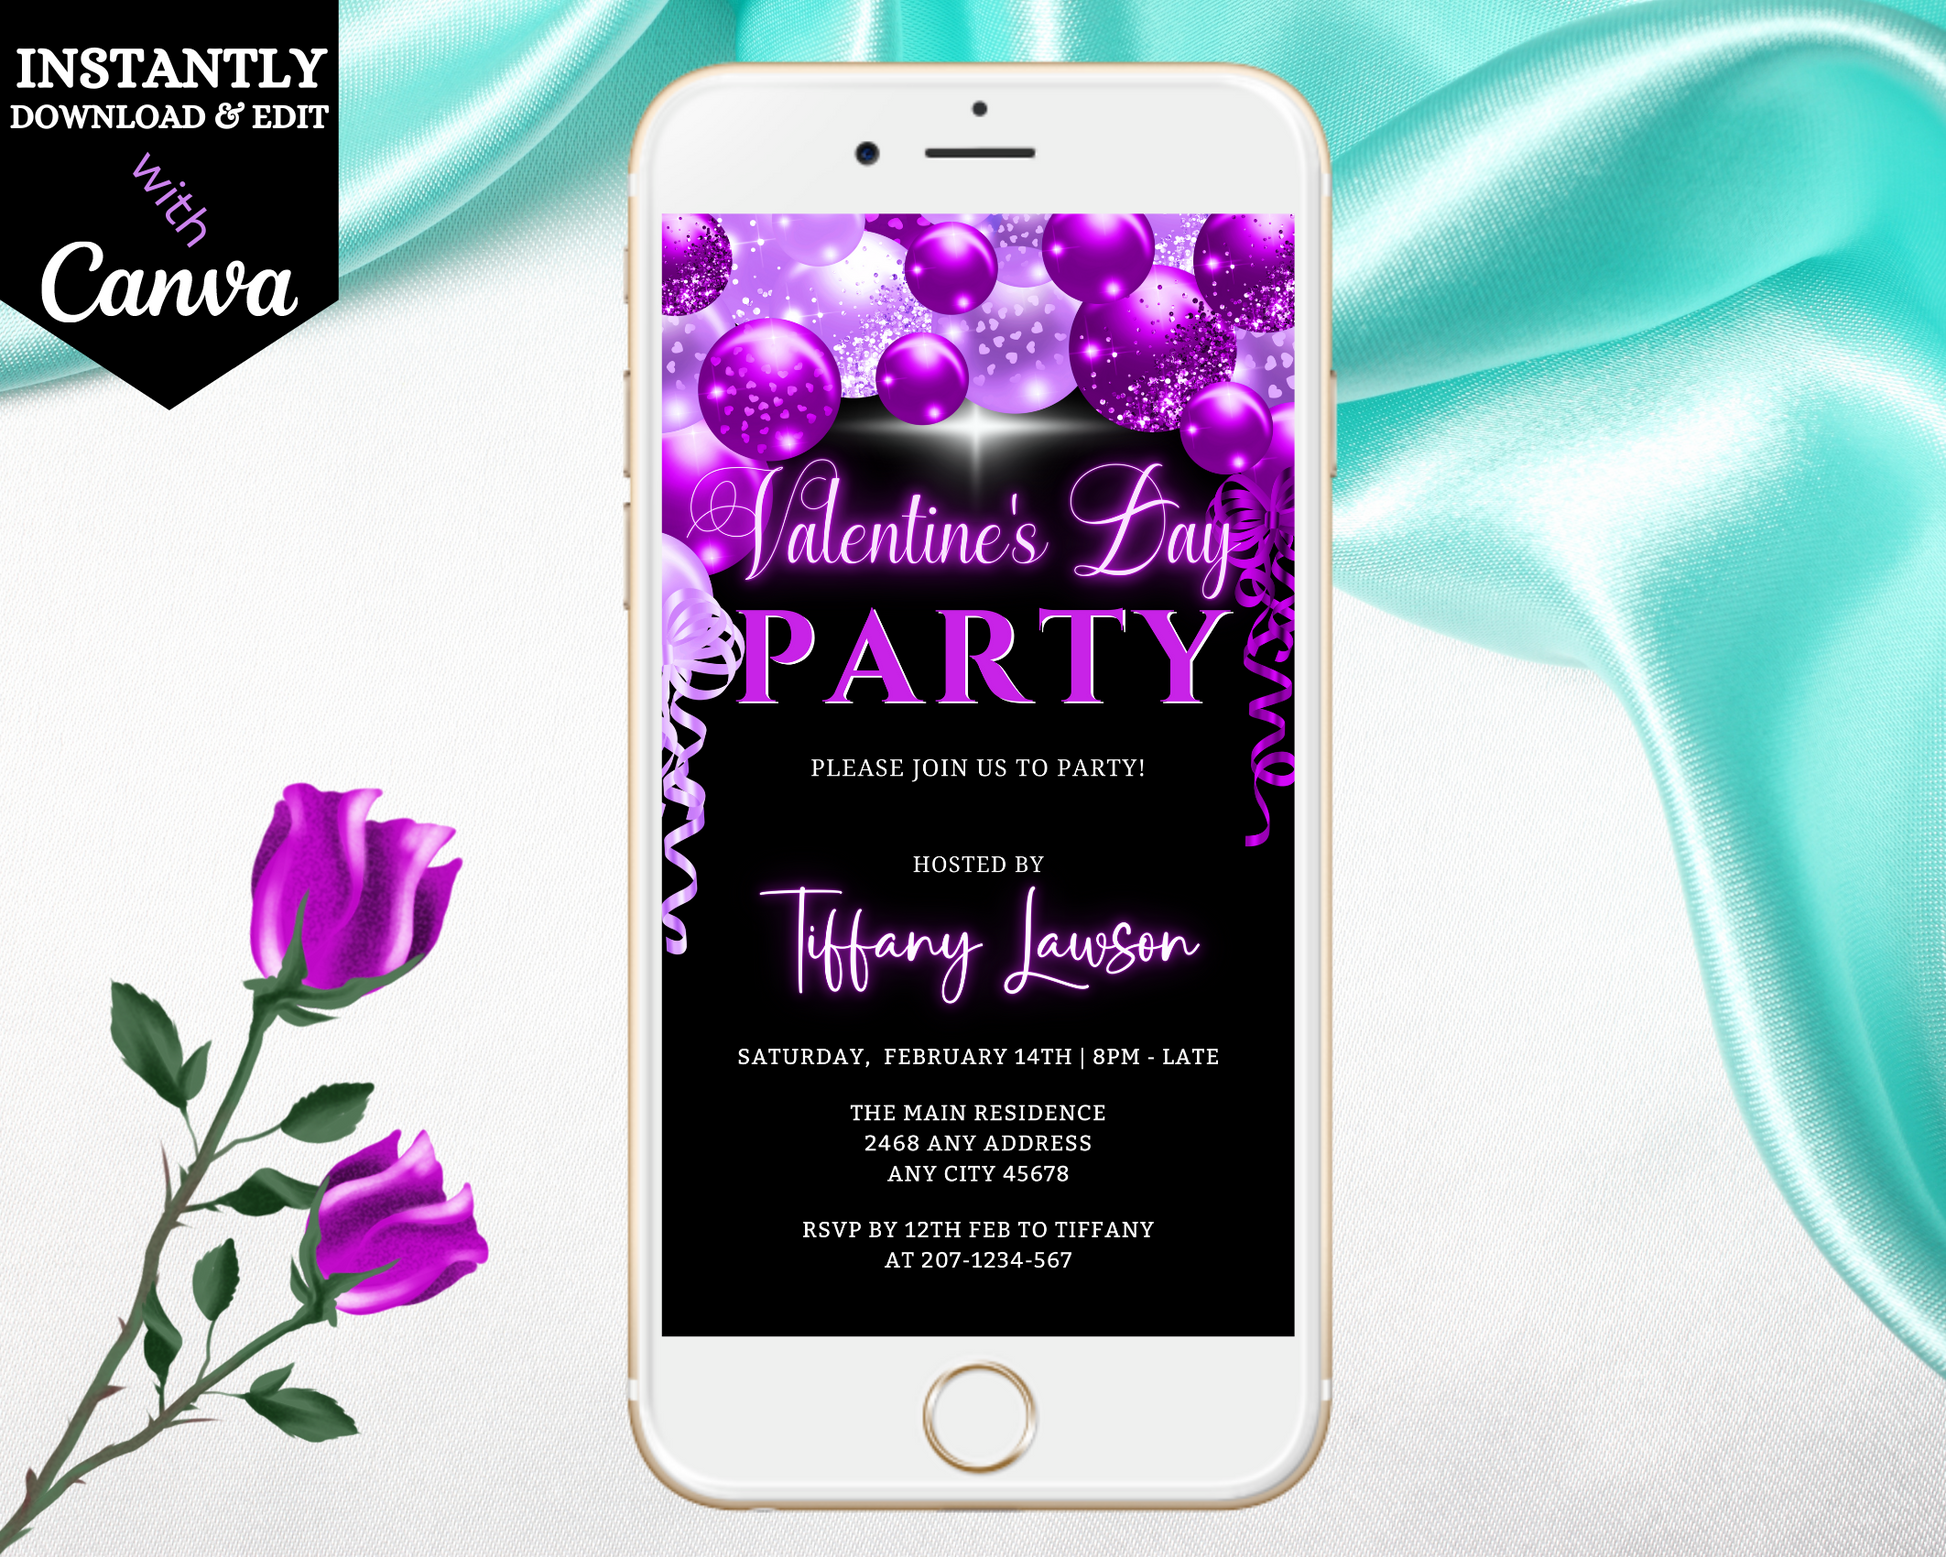 Neon Purple Balloons Valentines Party Evite featuring editable text and purple floral accents on a smartphone screen. Ideal for digital invitations.